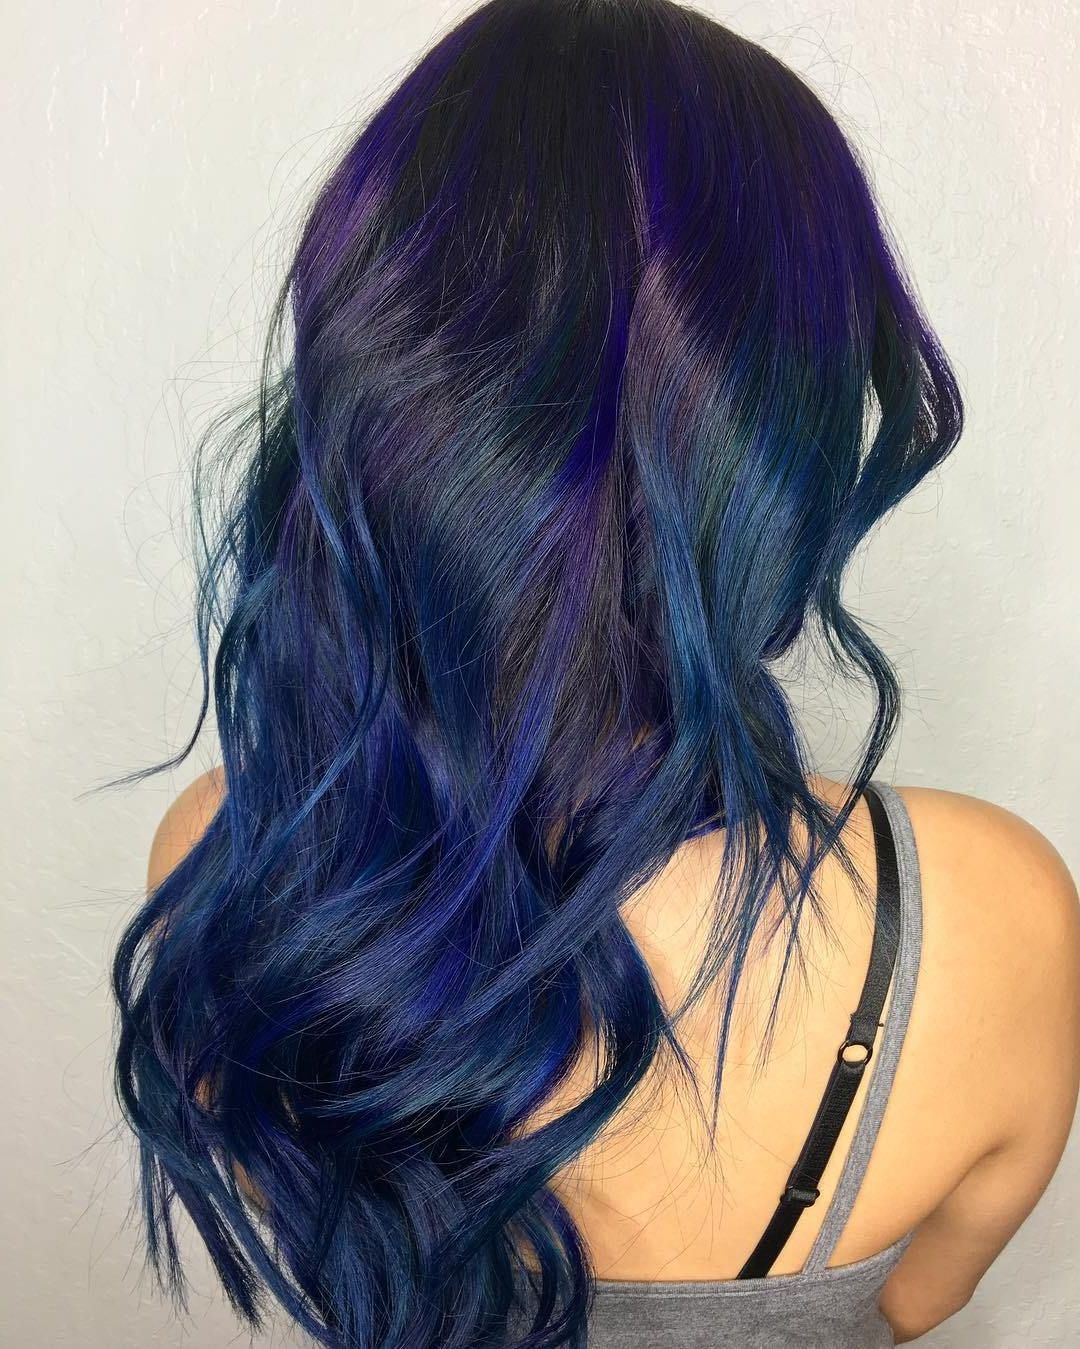 2018 Purple And Black Medium Hairstyles Throughout 20 Dark Blue Hairstyles That Will Brighten Up Your Look In  (View 6 of 20)